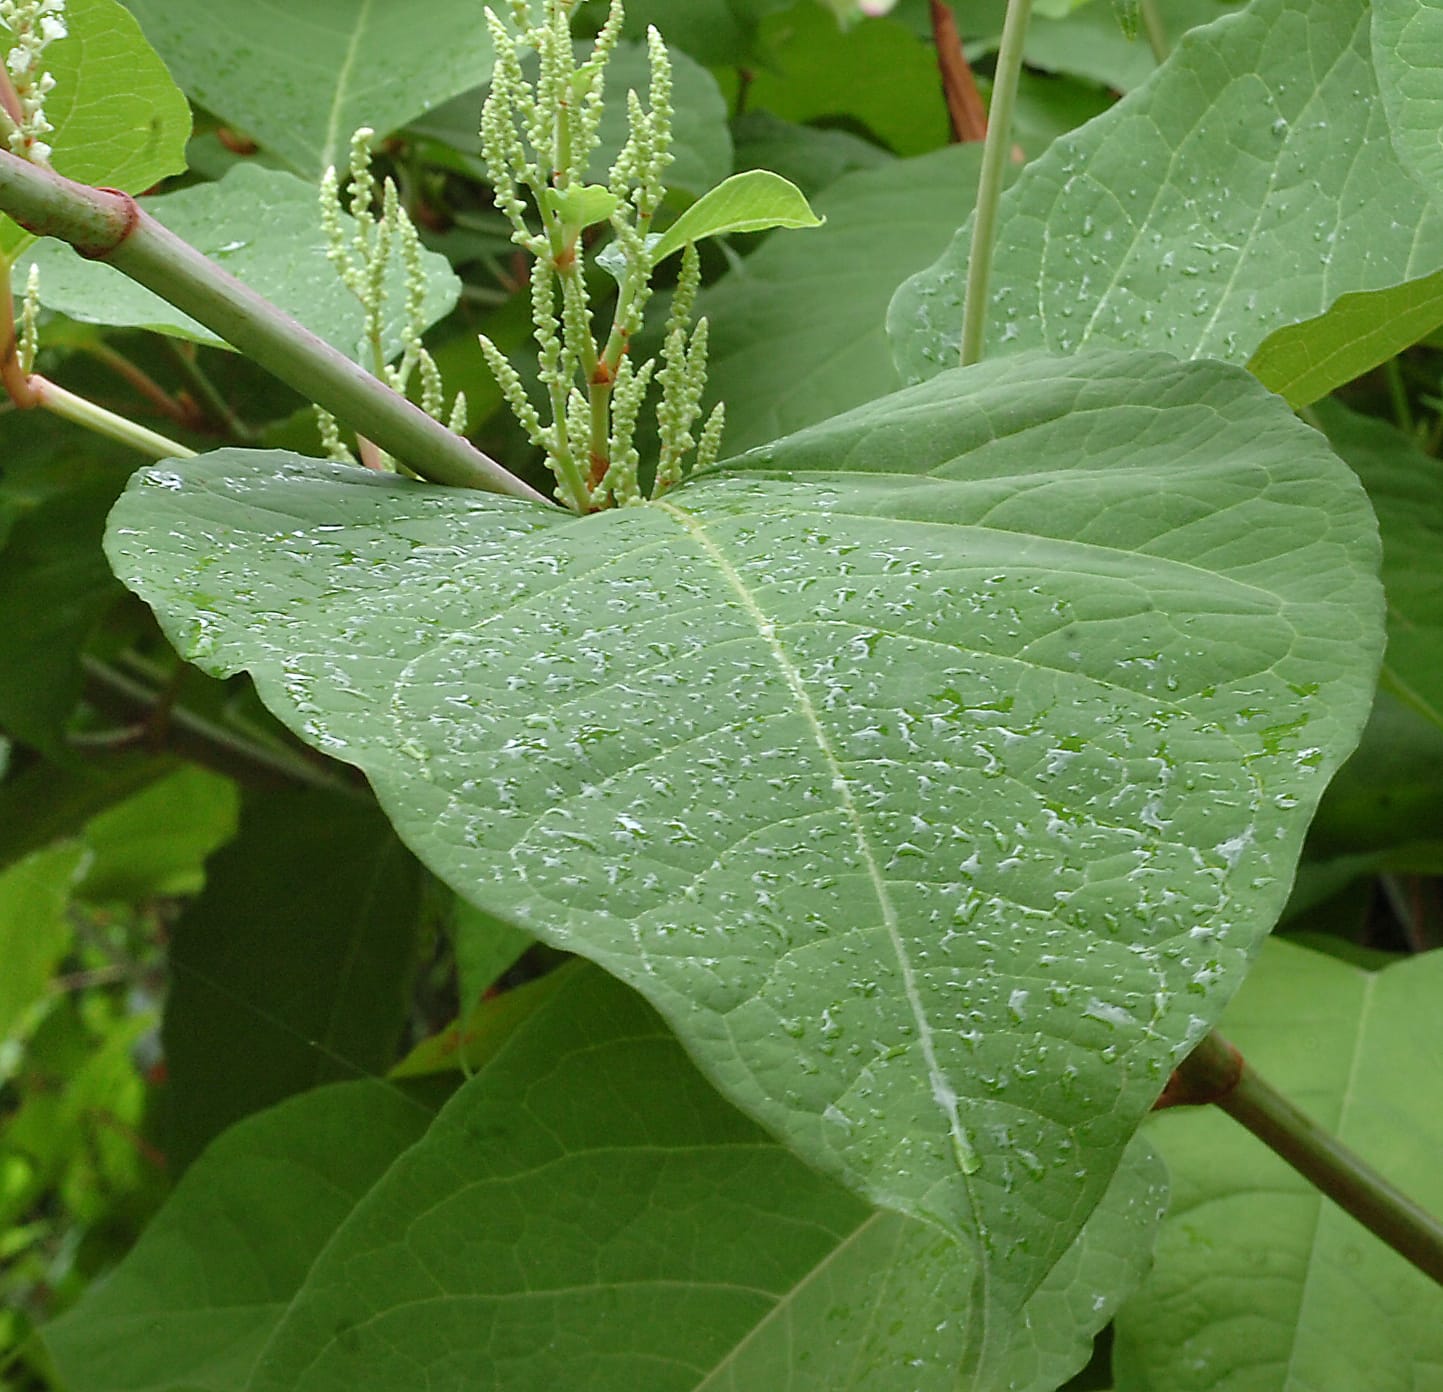 Japanese knotweed is an invasive species that thrives near water.